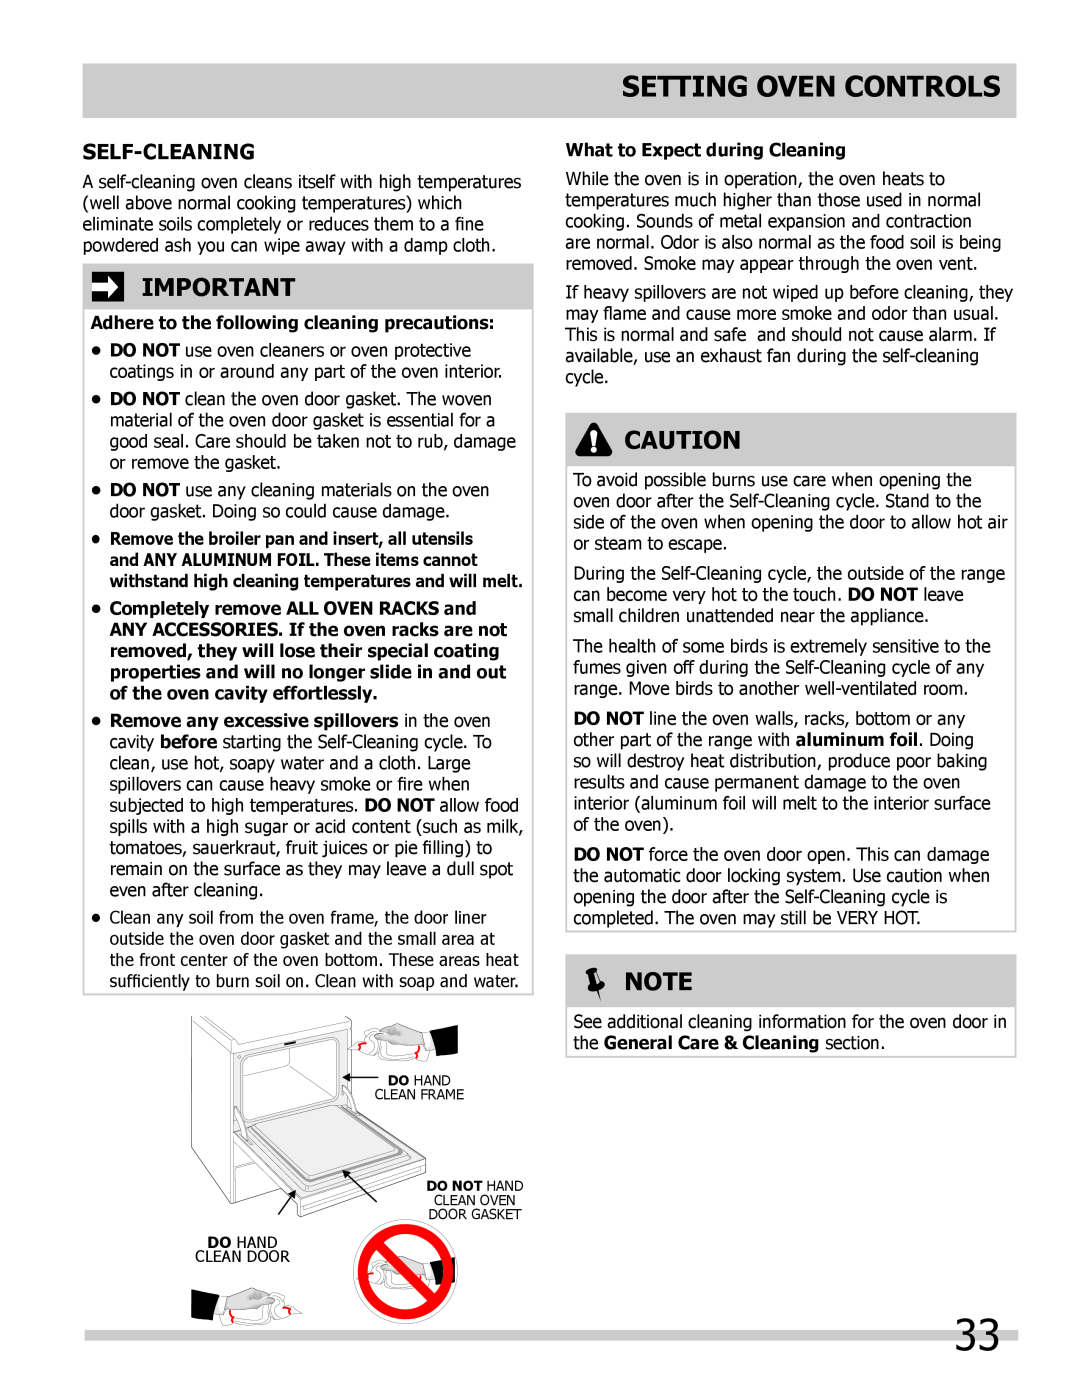 Frigidaire FGES3065KW Self-Cleaning, Adhere to the following cleaning precautions, What to Expect during Cleaning,  Note 